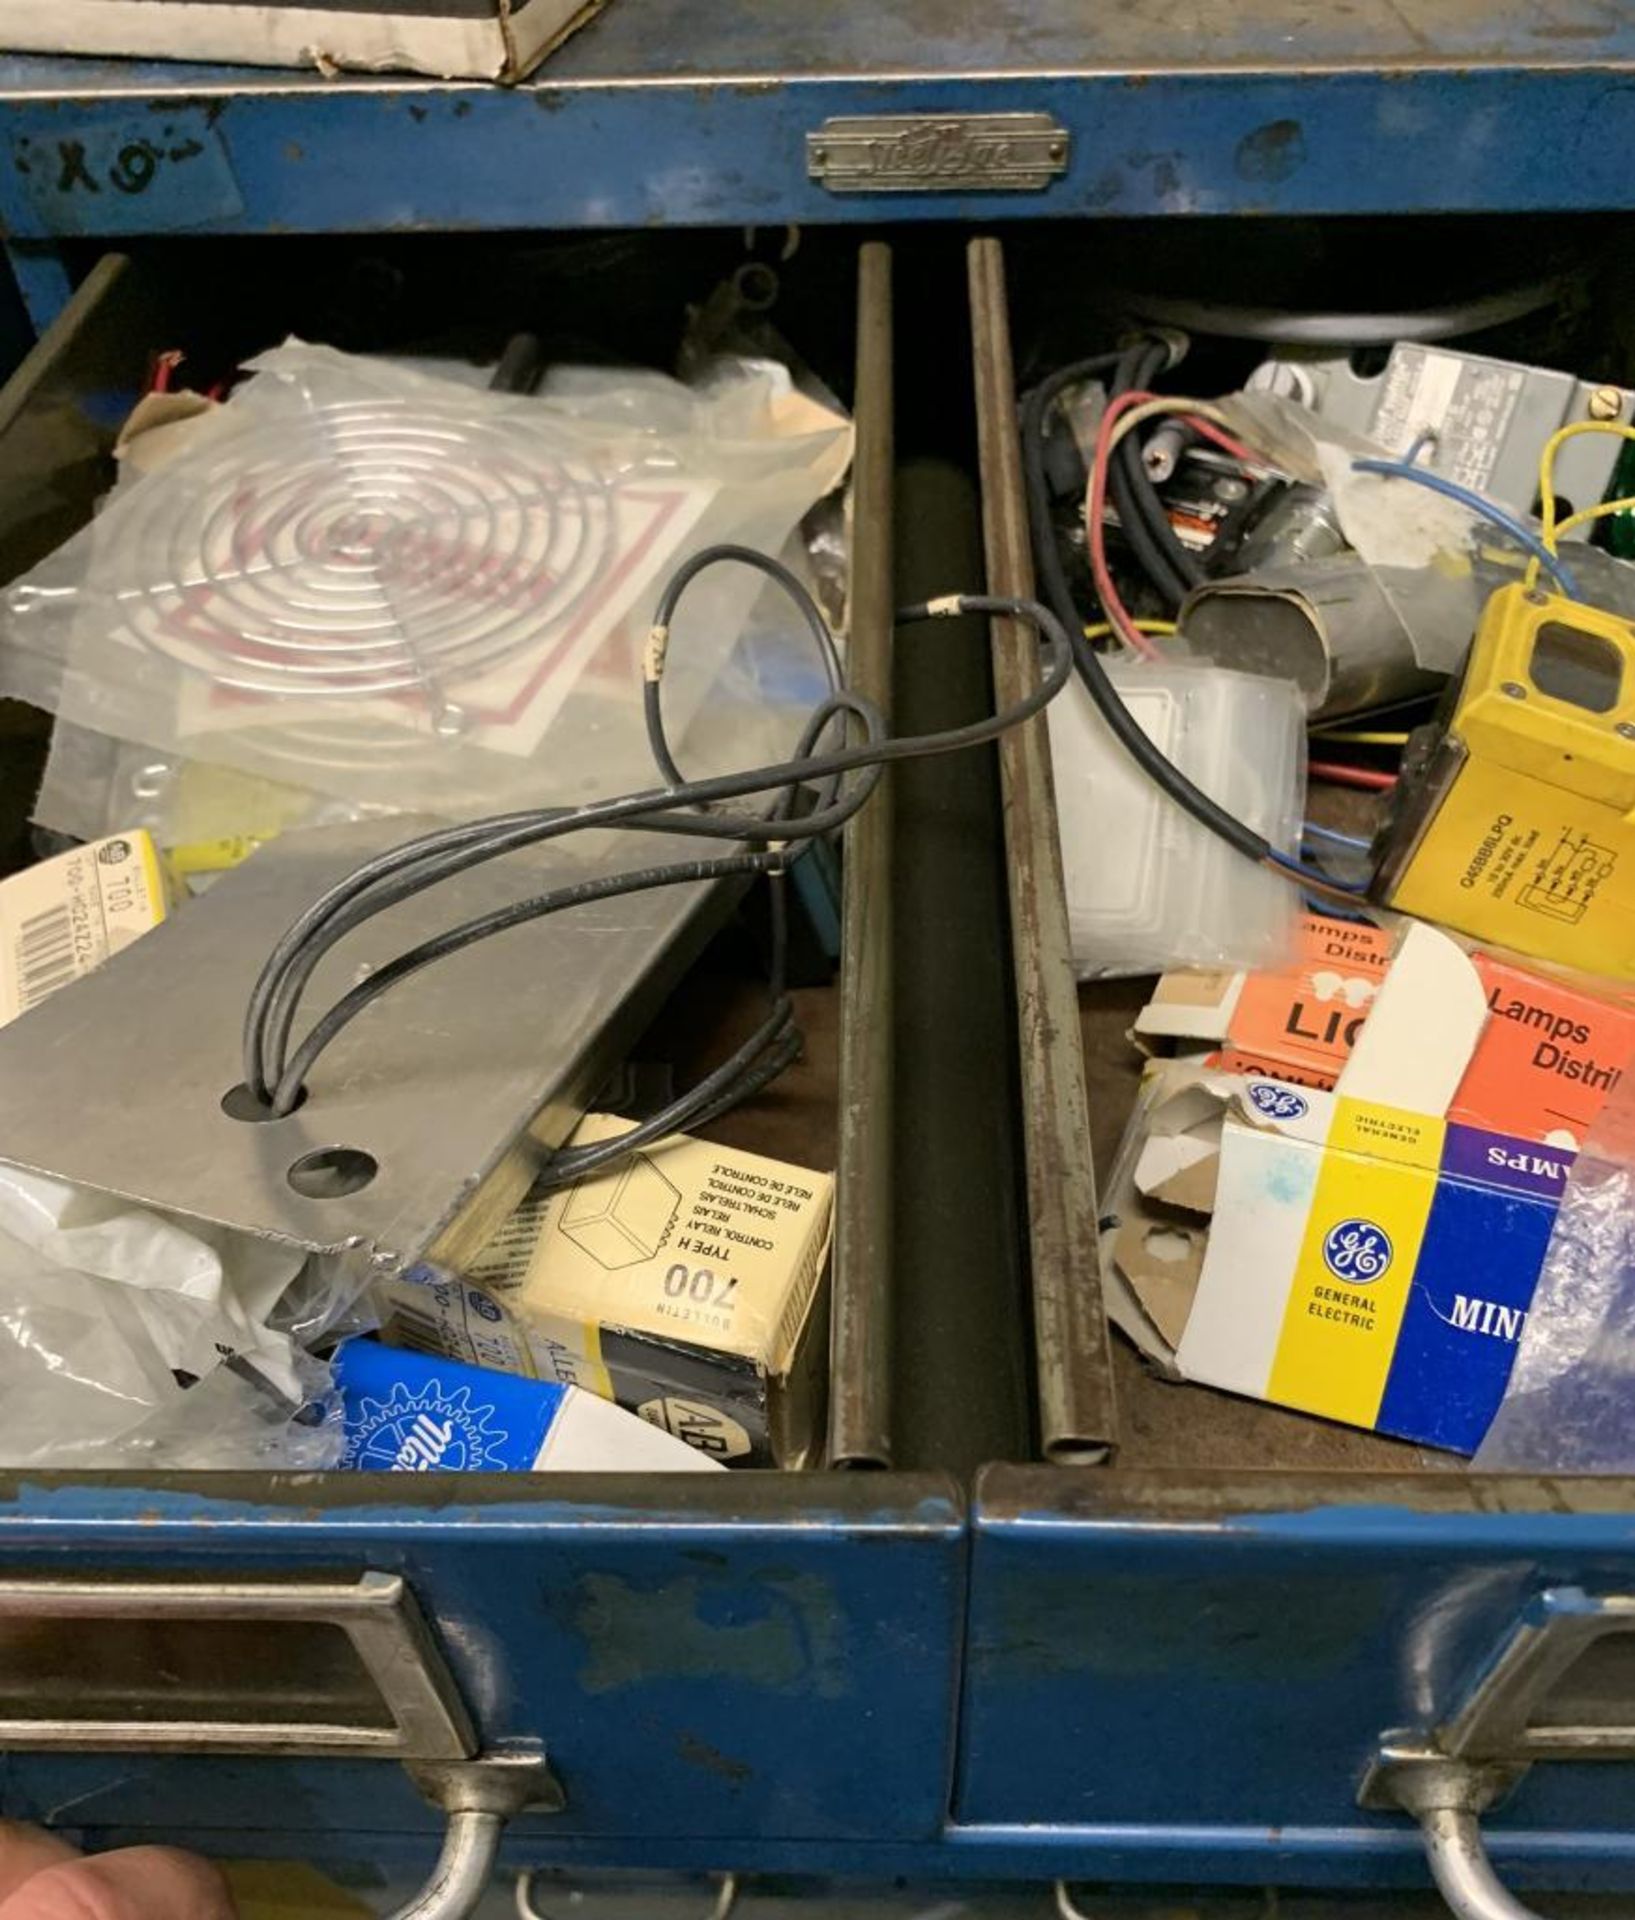 Contents of Room - Shelf Units, Spools of Wire, Contactors, Vacuum Pump, Electrical Supplies - Image 23 of 33